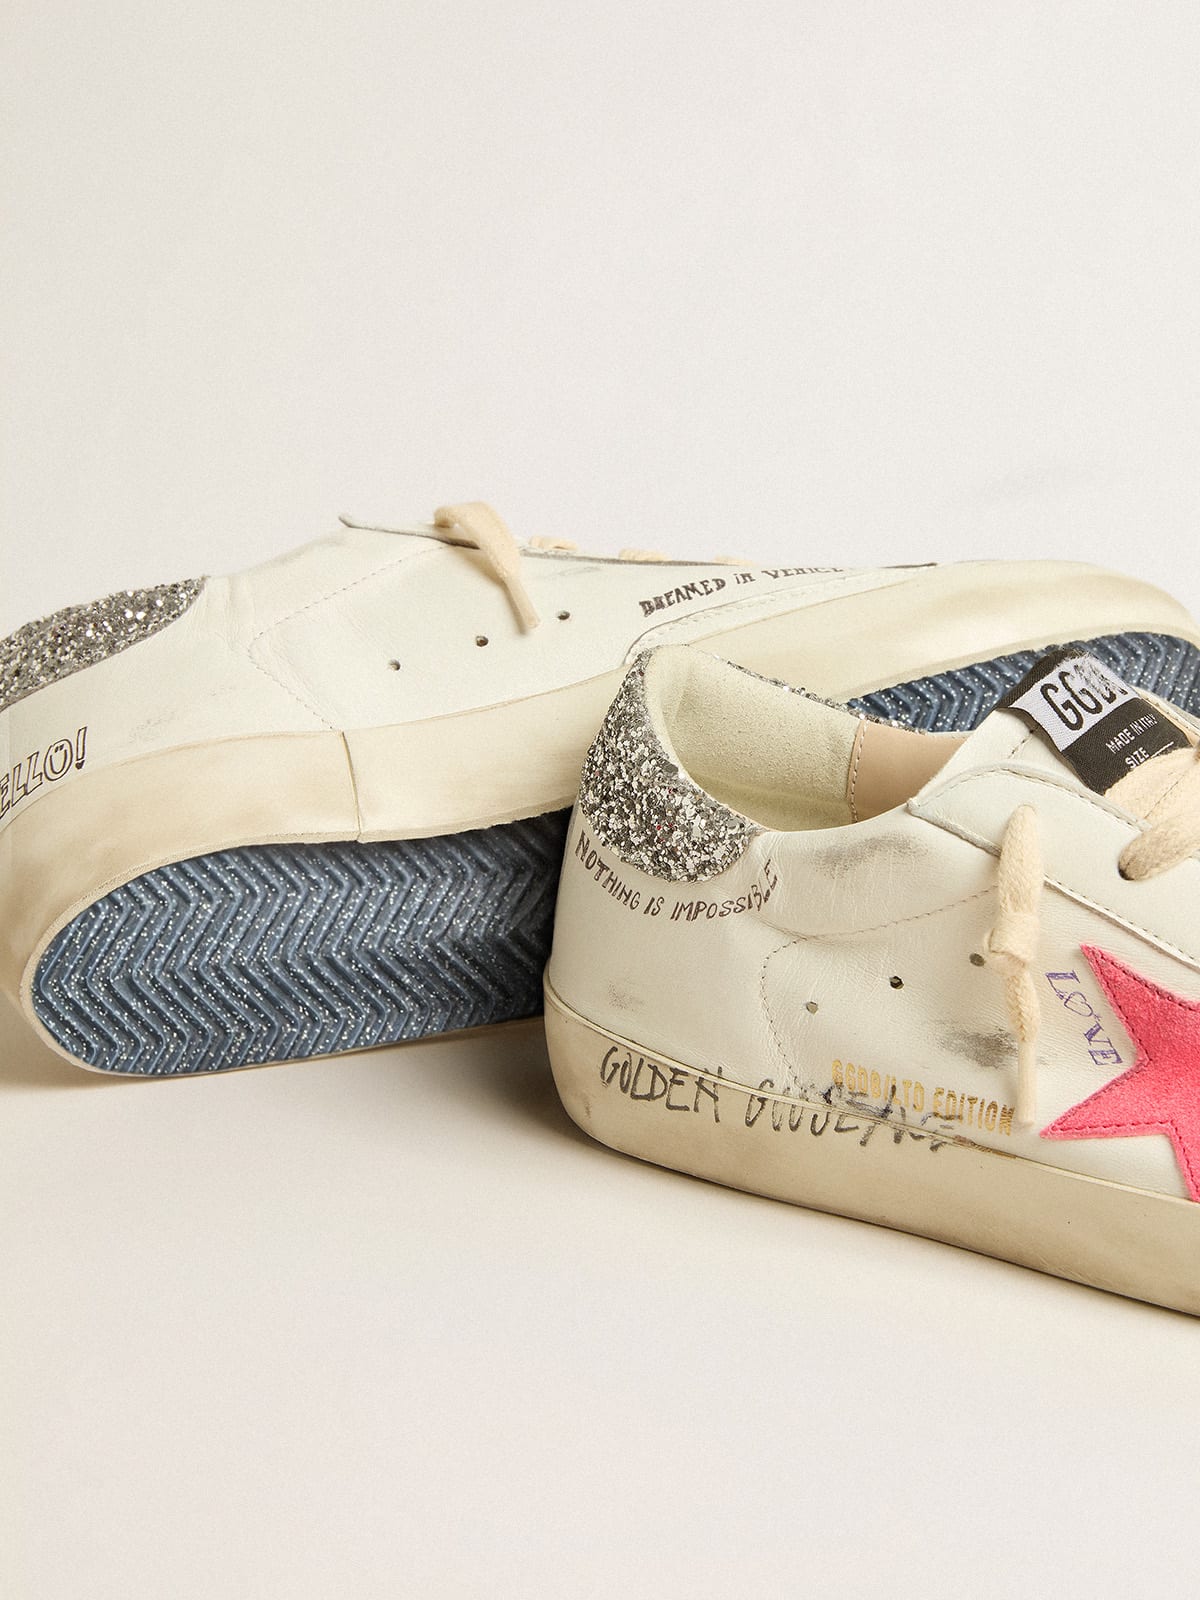 Golden Goose - Super-Star LTD with fluorescent lobster suede star and glitter heel tab in 